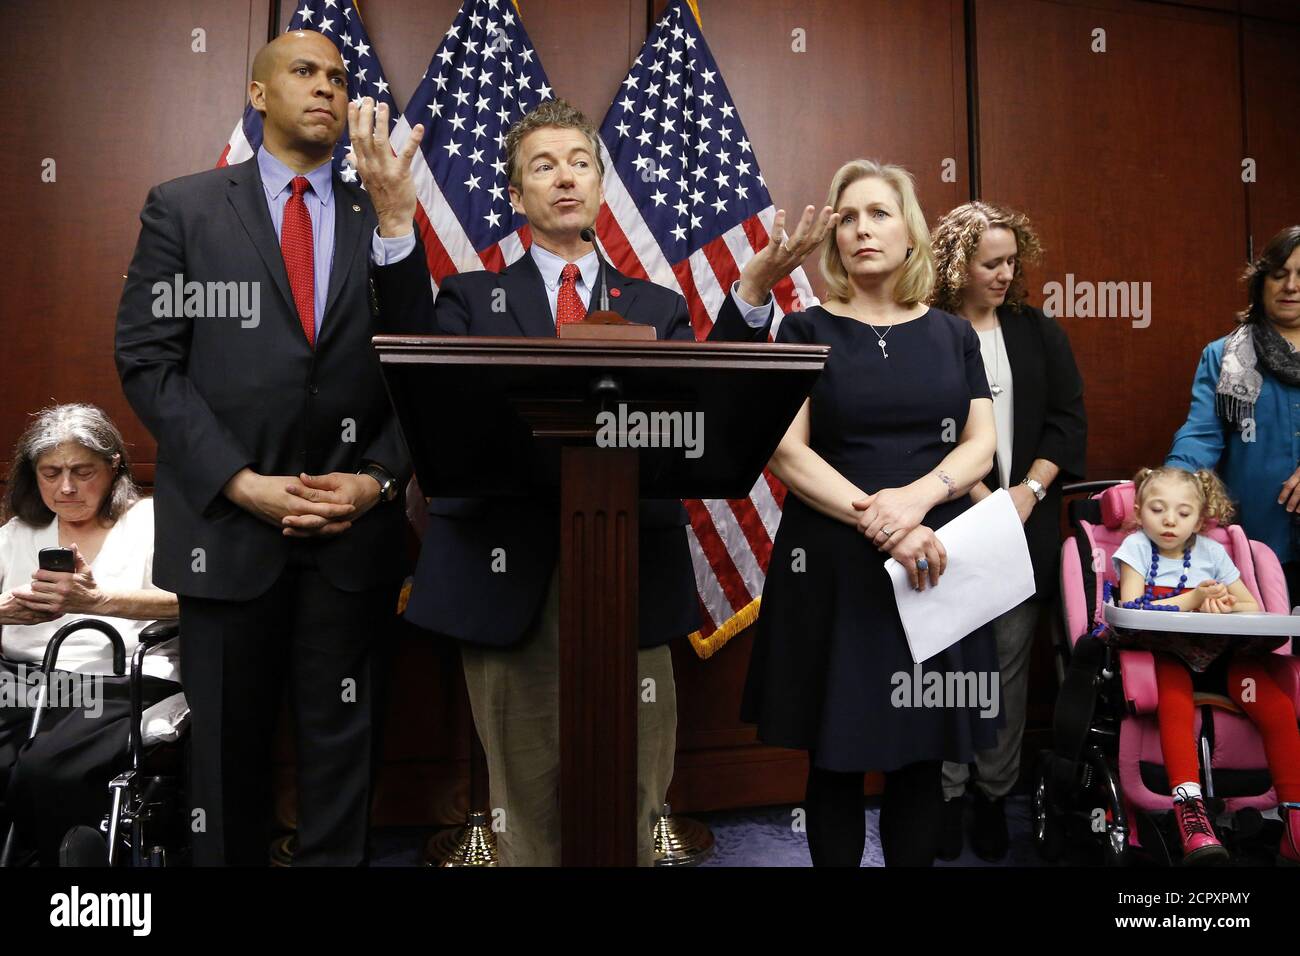 U.S. Senator Cory Booker (D-NJ) (from 2nd L), Senator Rand Paul (R-KY), and Senator Kirsten Gillibrand (D-NY) hold a news conference, to introduce legislation that would prevent the federal government from prosecuting medical marijuana users in states where it is legal, at the U.S. Capitol in Washington, March 10, 2015. Also pictured are medical marijuana patients Sandy Faiola (L) from New Jersey and Morgan Jones (bottom R), a 4-year-old Druvet syndrome sufferer from New York.   REUTERS/Jonathan Ernst    (UNITED STATES - Tags: POLITICS HEALTH SOCIETY) Stock Photo